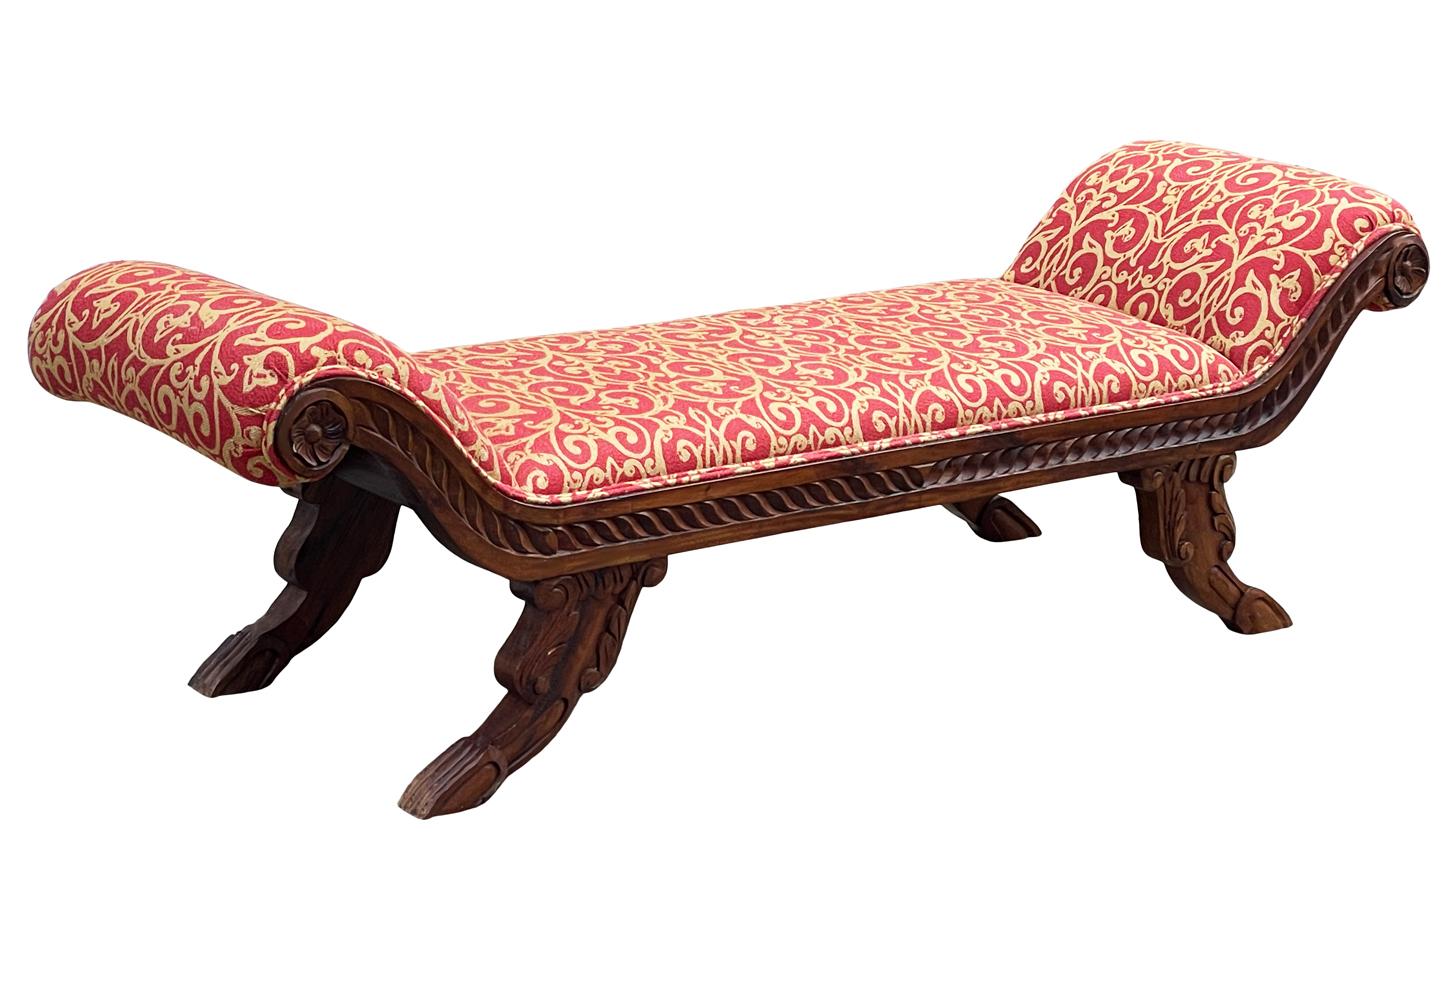 A well made carved wood bench from Italy. Fabric is original and very clean. Ready to use condition. 